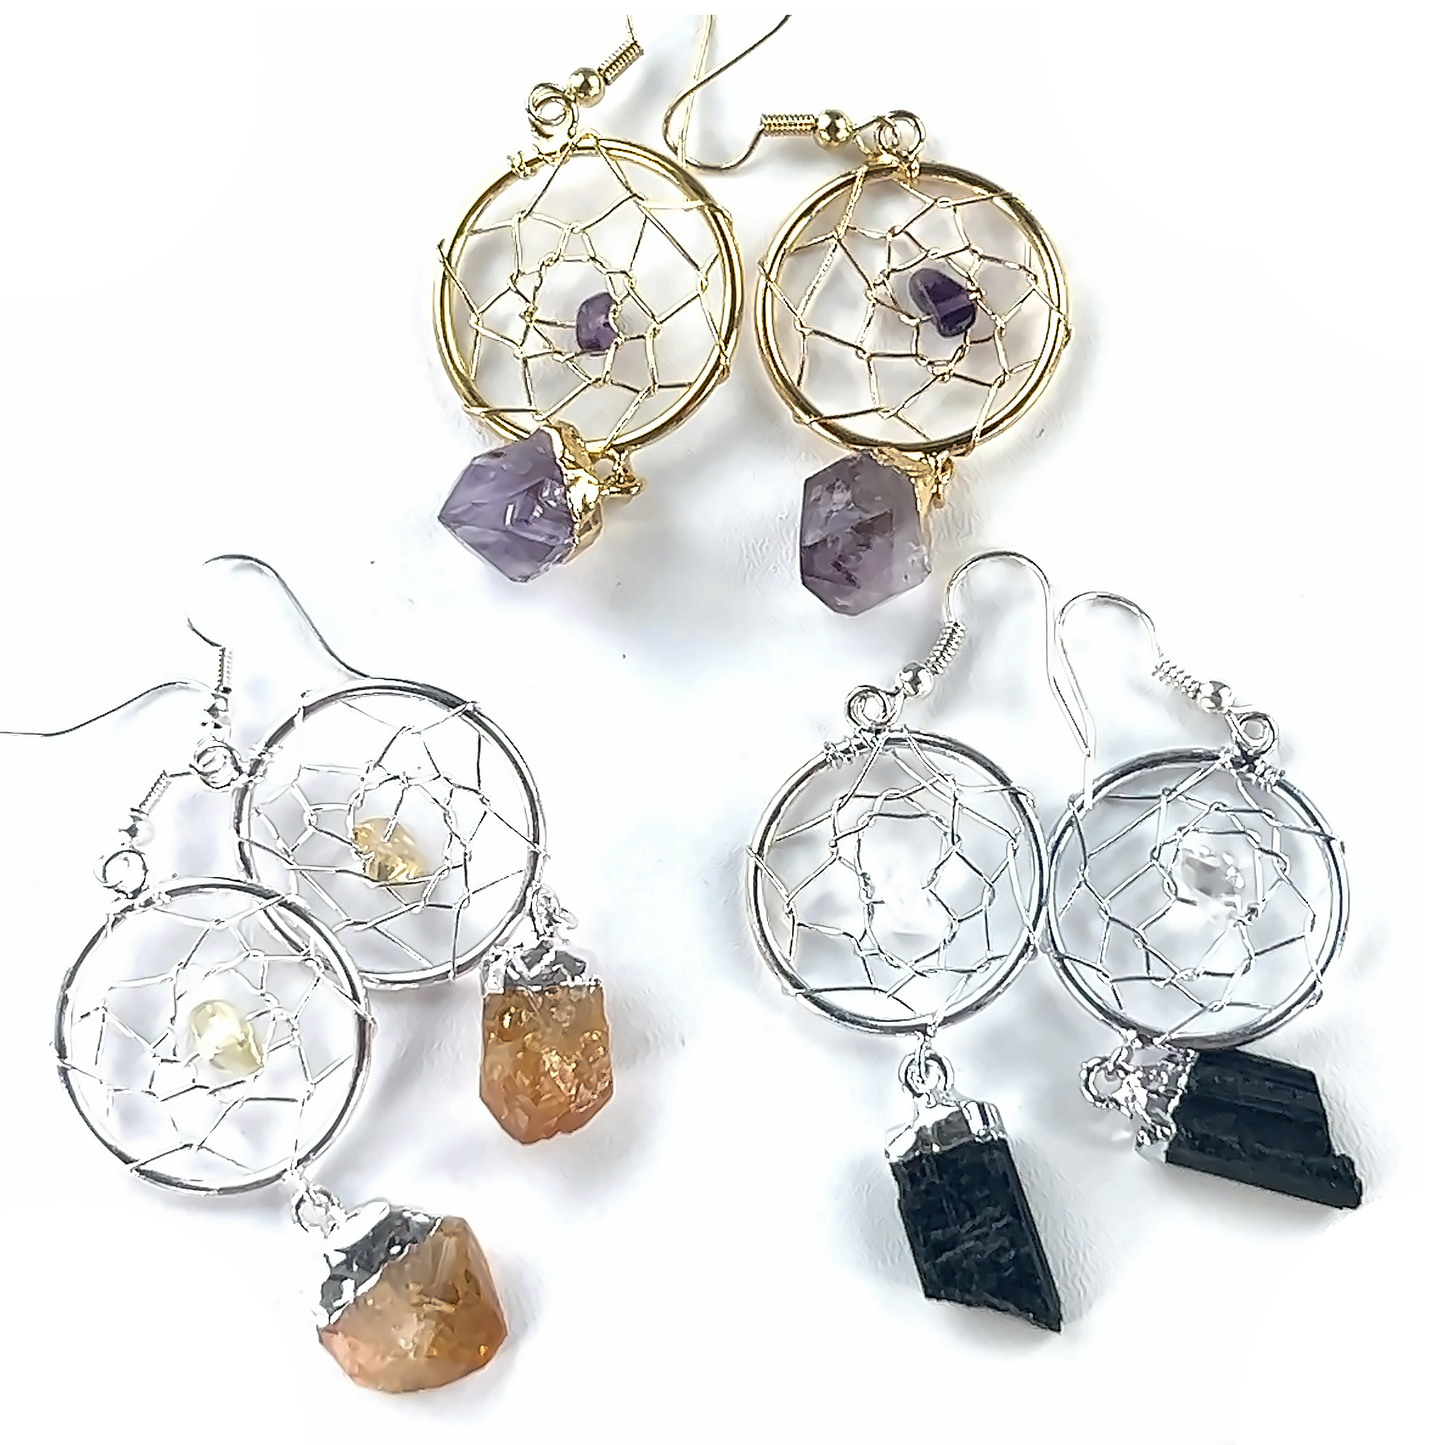 Super Silver's Raw Crystal Dream Catcher Earrings elegantly combine gemstones such as amethyst and quartz crystals.